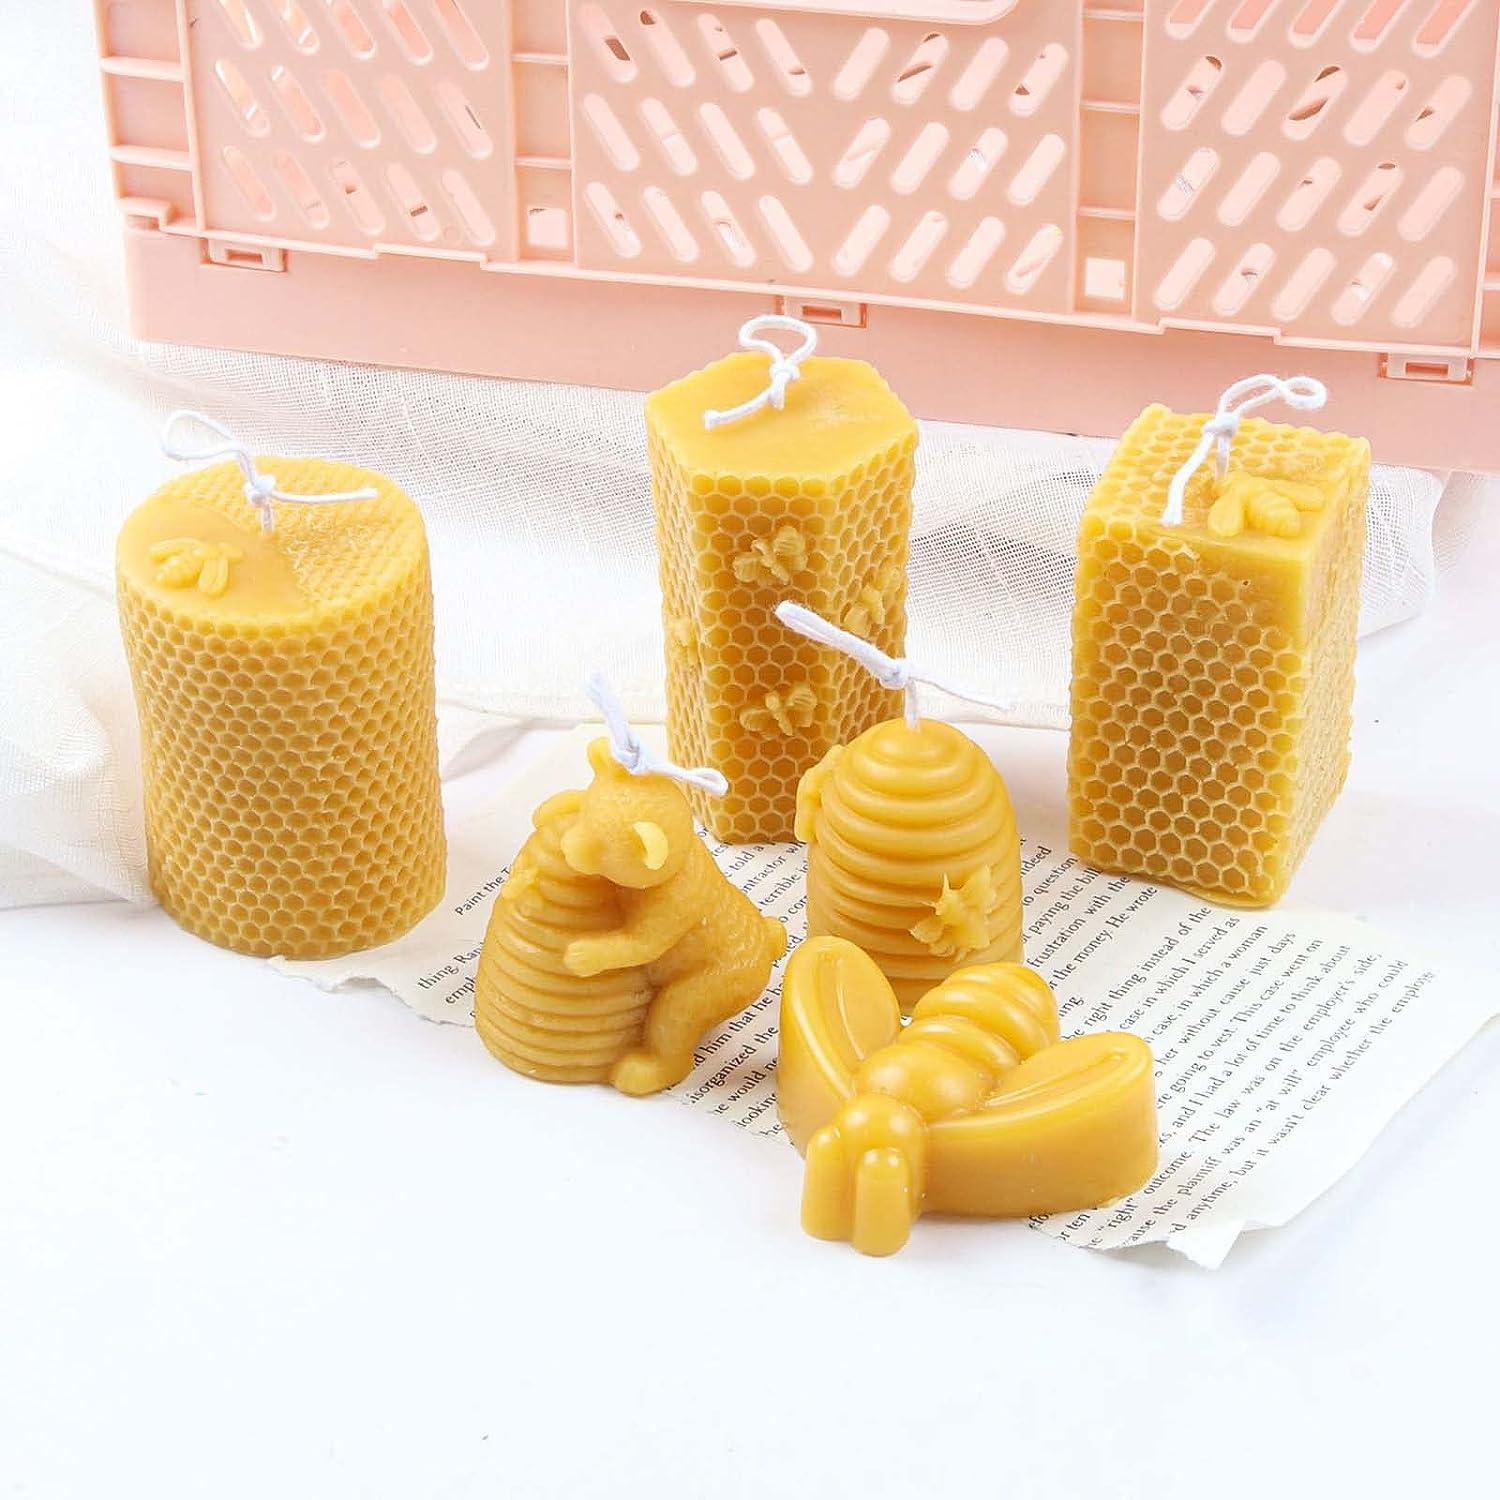 Large Honeycomb Silicone Soap/Wax Mold *Inventory Clearance*